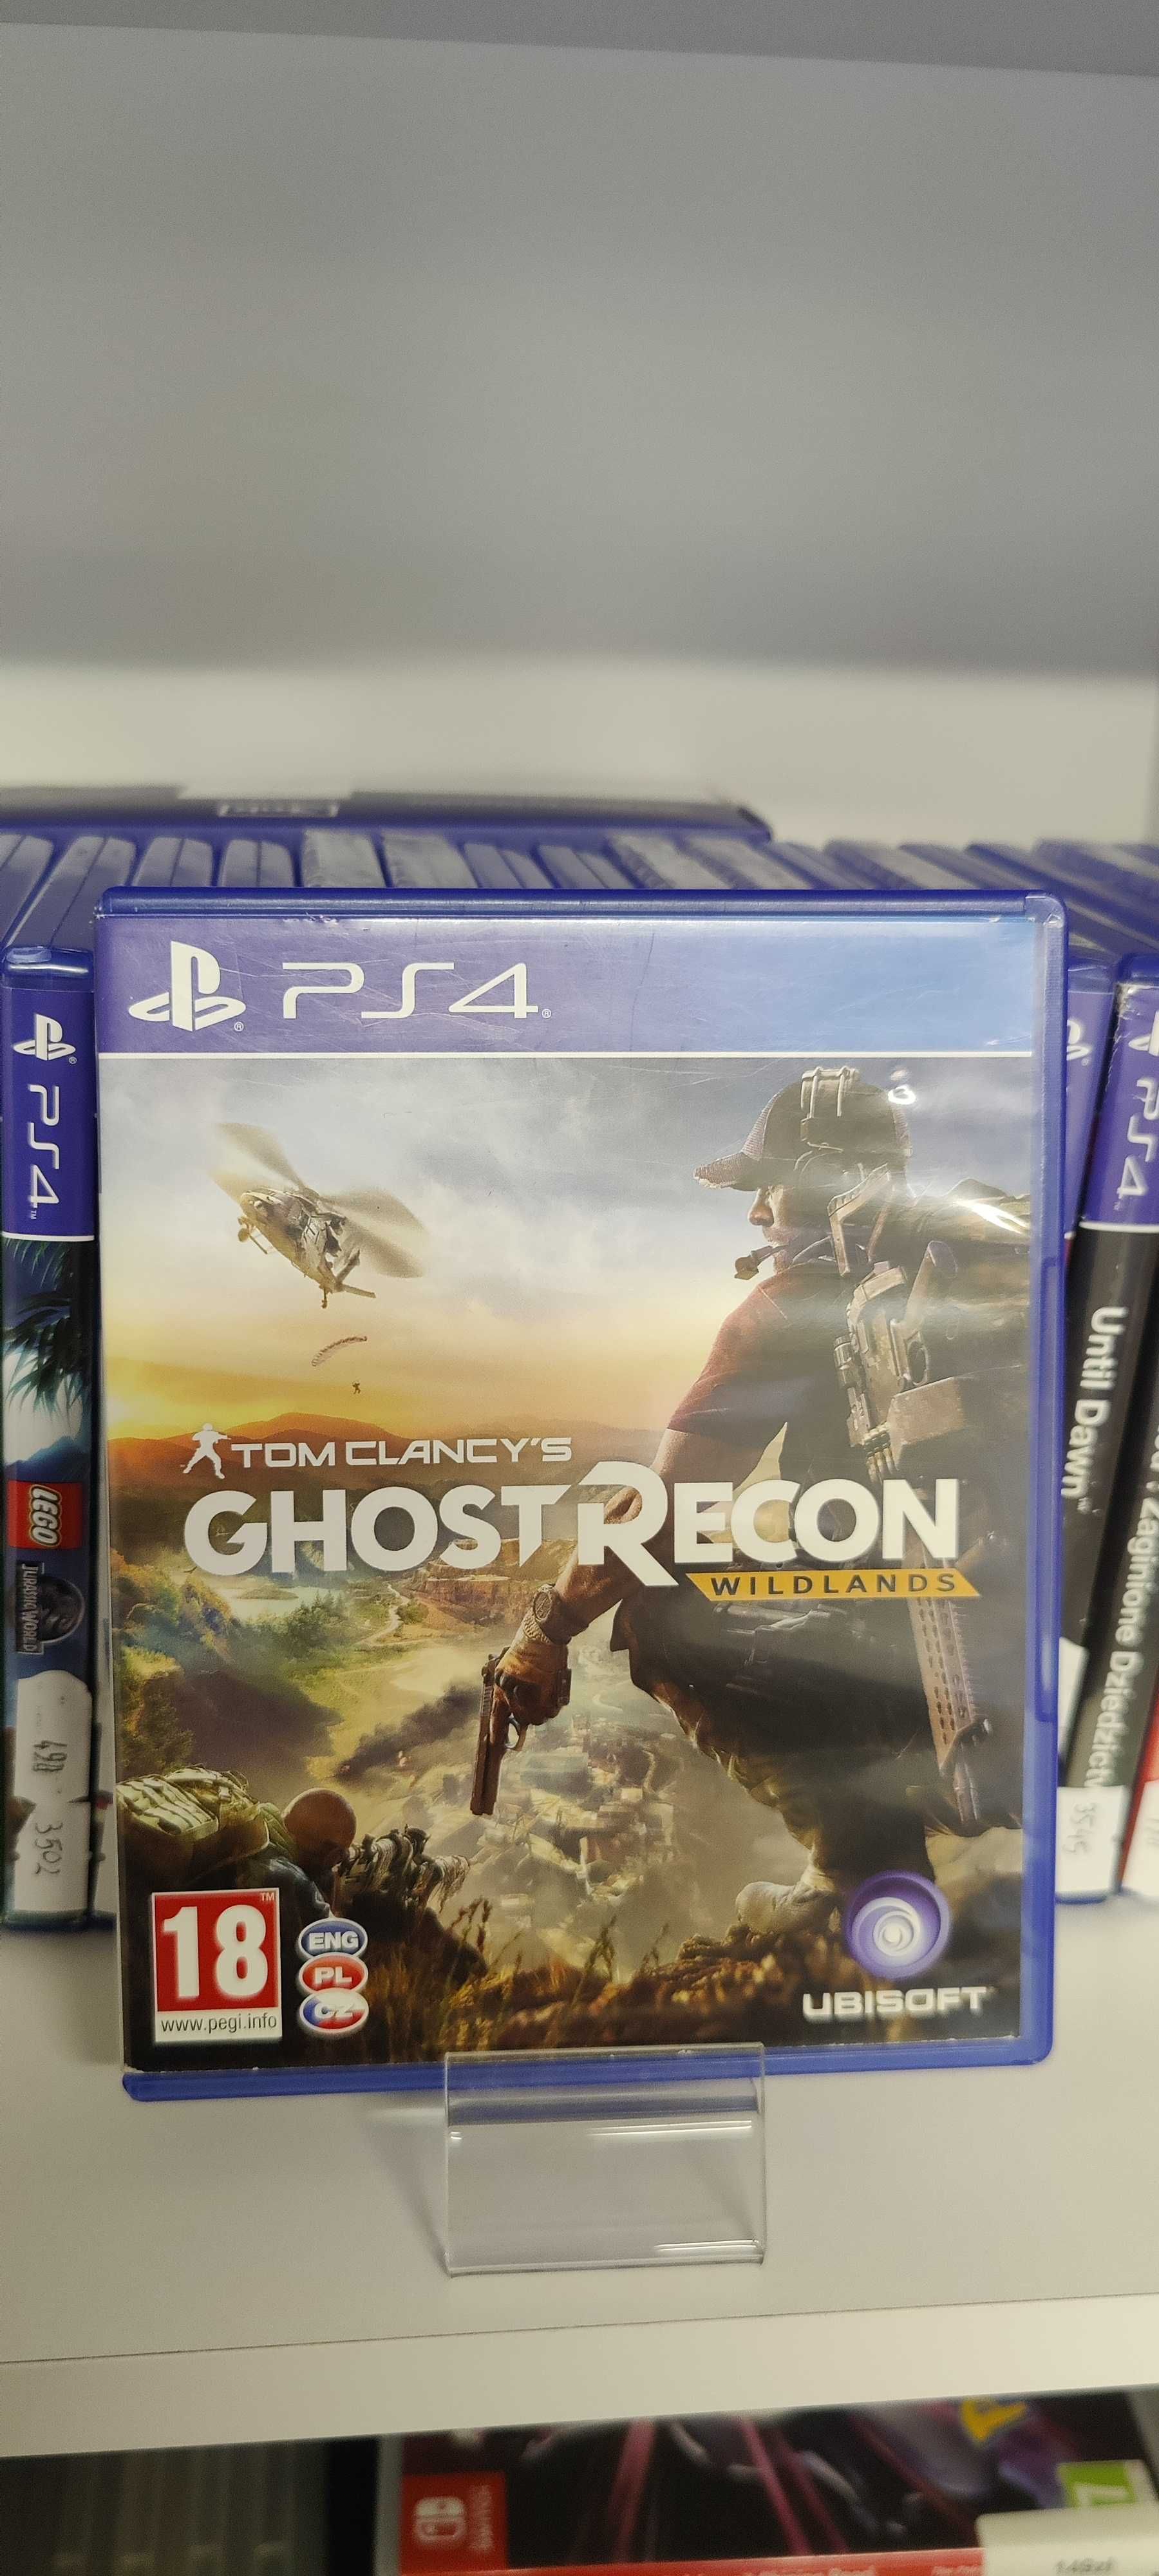 Tom Clancy's Ghost Recon Wildlands PS4 - As Game & GSM 3562